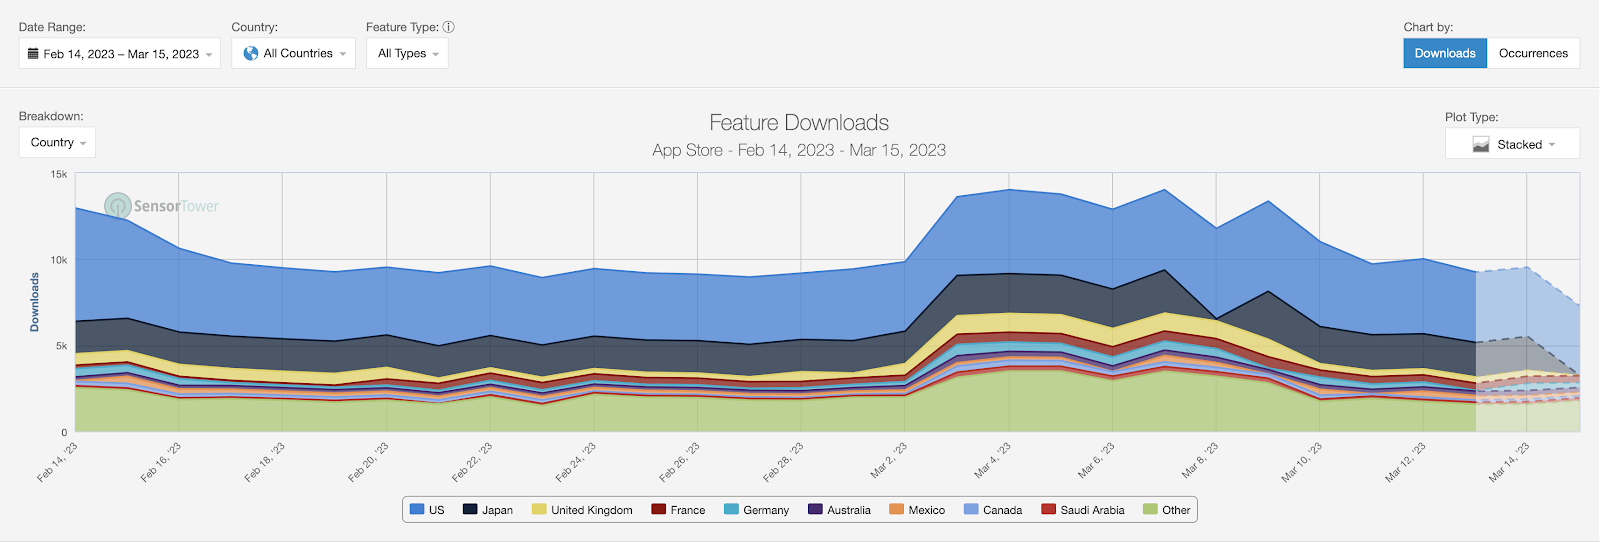 Downloads_Country_Breakdown.png